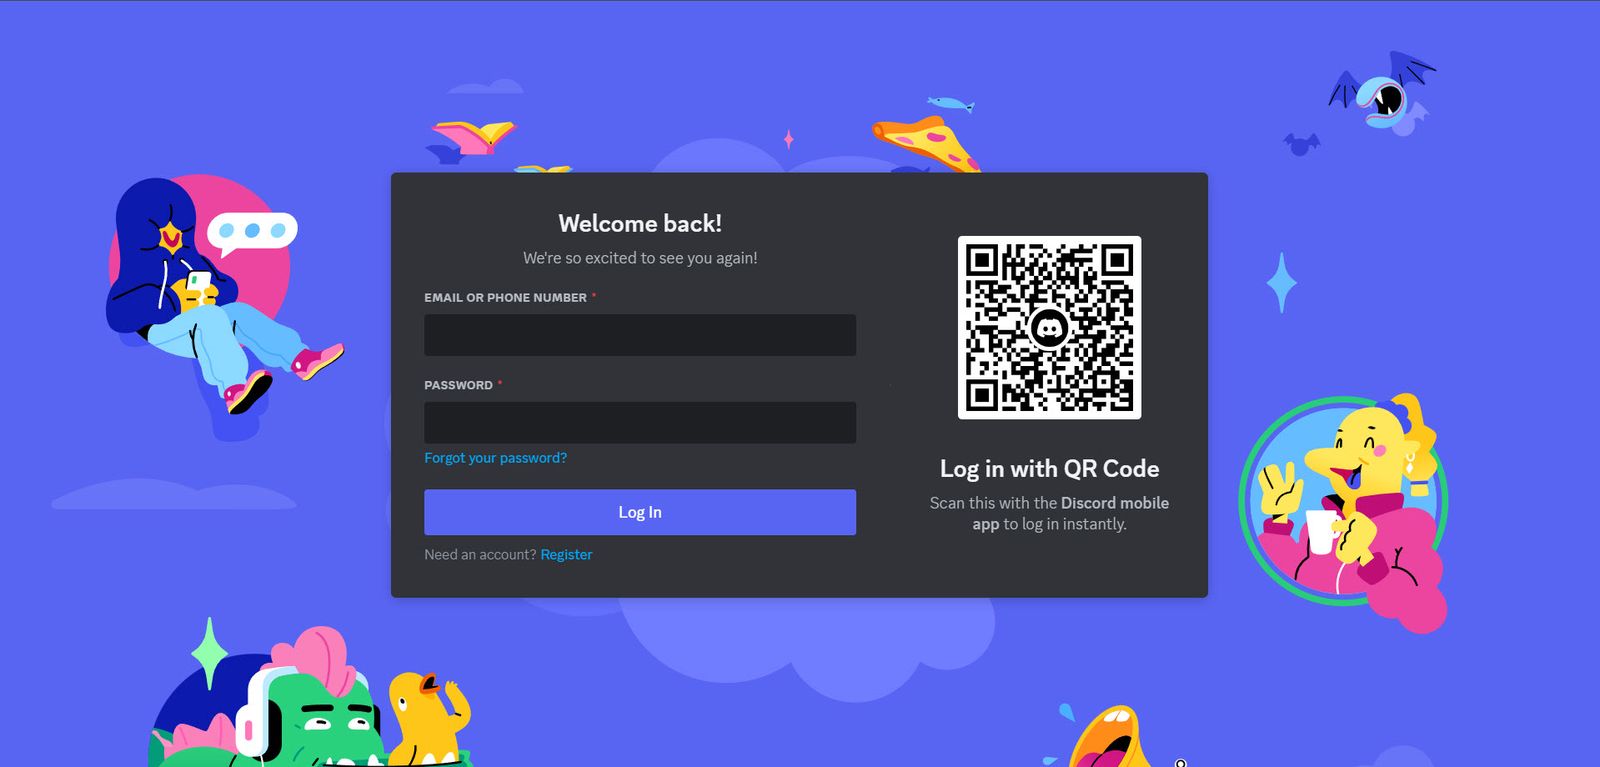 A screenshot showing the Discord login page on a Steam Deck device